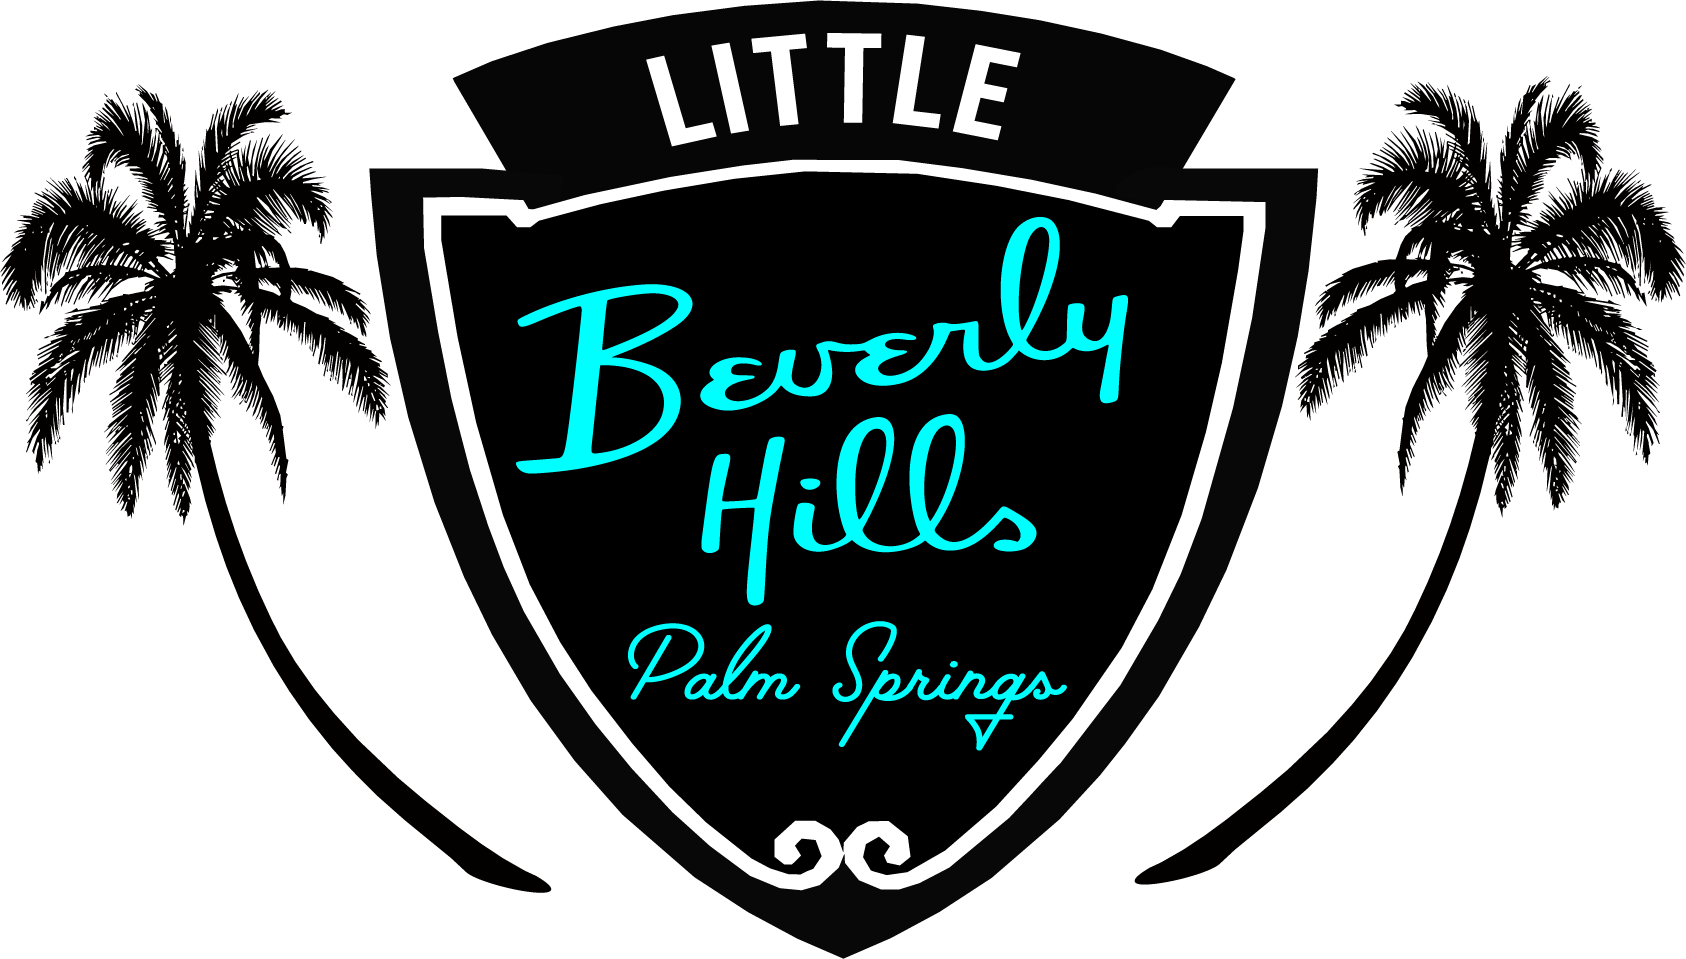 Little Beverly Hills Palm Springs, CA neighborhood organization logo which appears like the legacy vintage sign surrounded by palm trees with a vintage font typestyle.